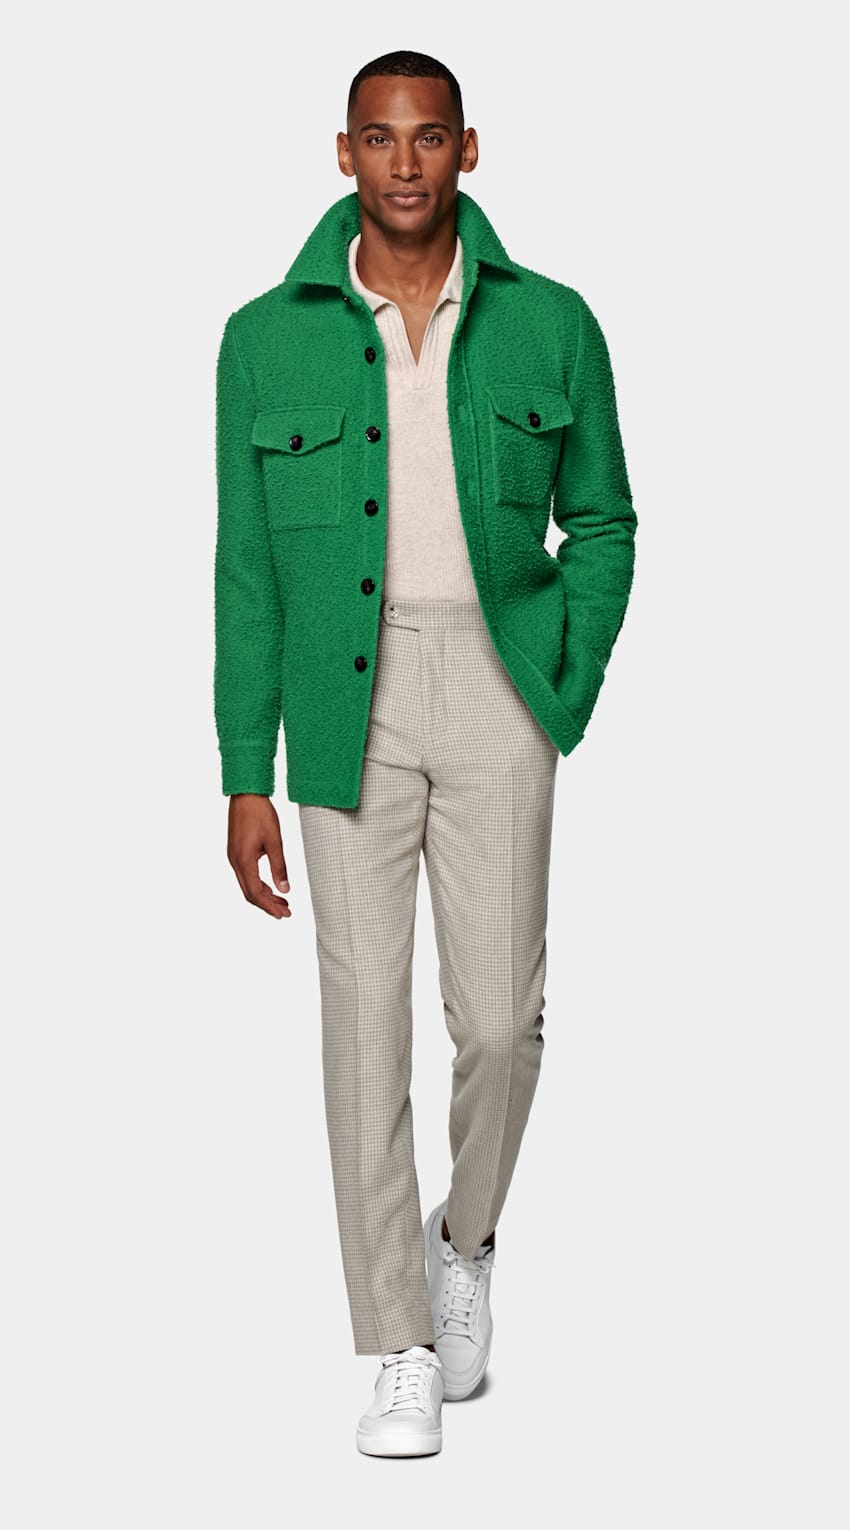 Green Shirt-Jacket Pure Wool SUITSUPPLY | vlr.eng.br